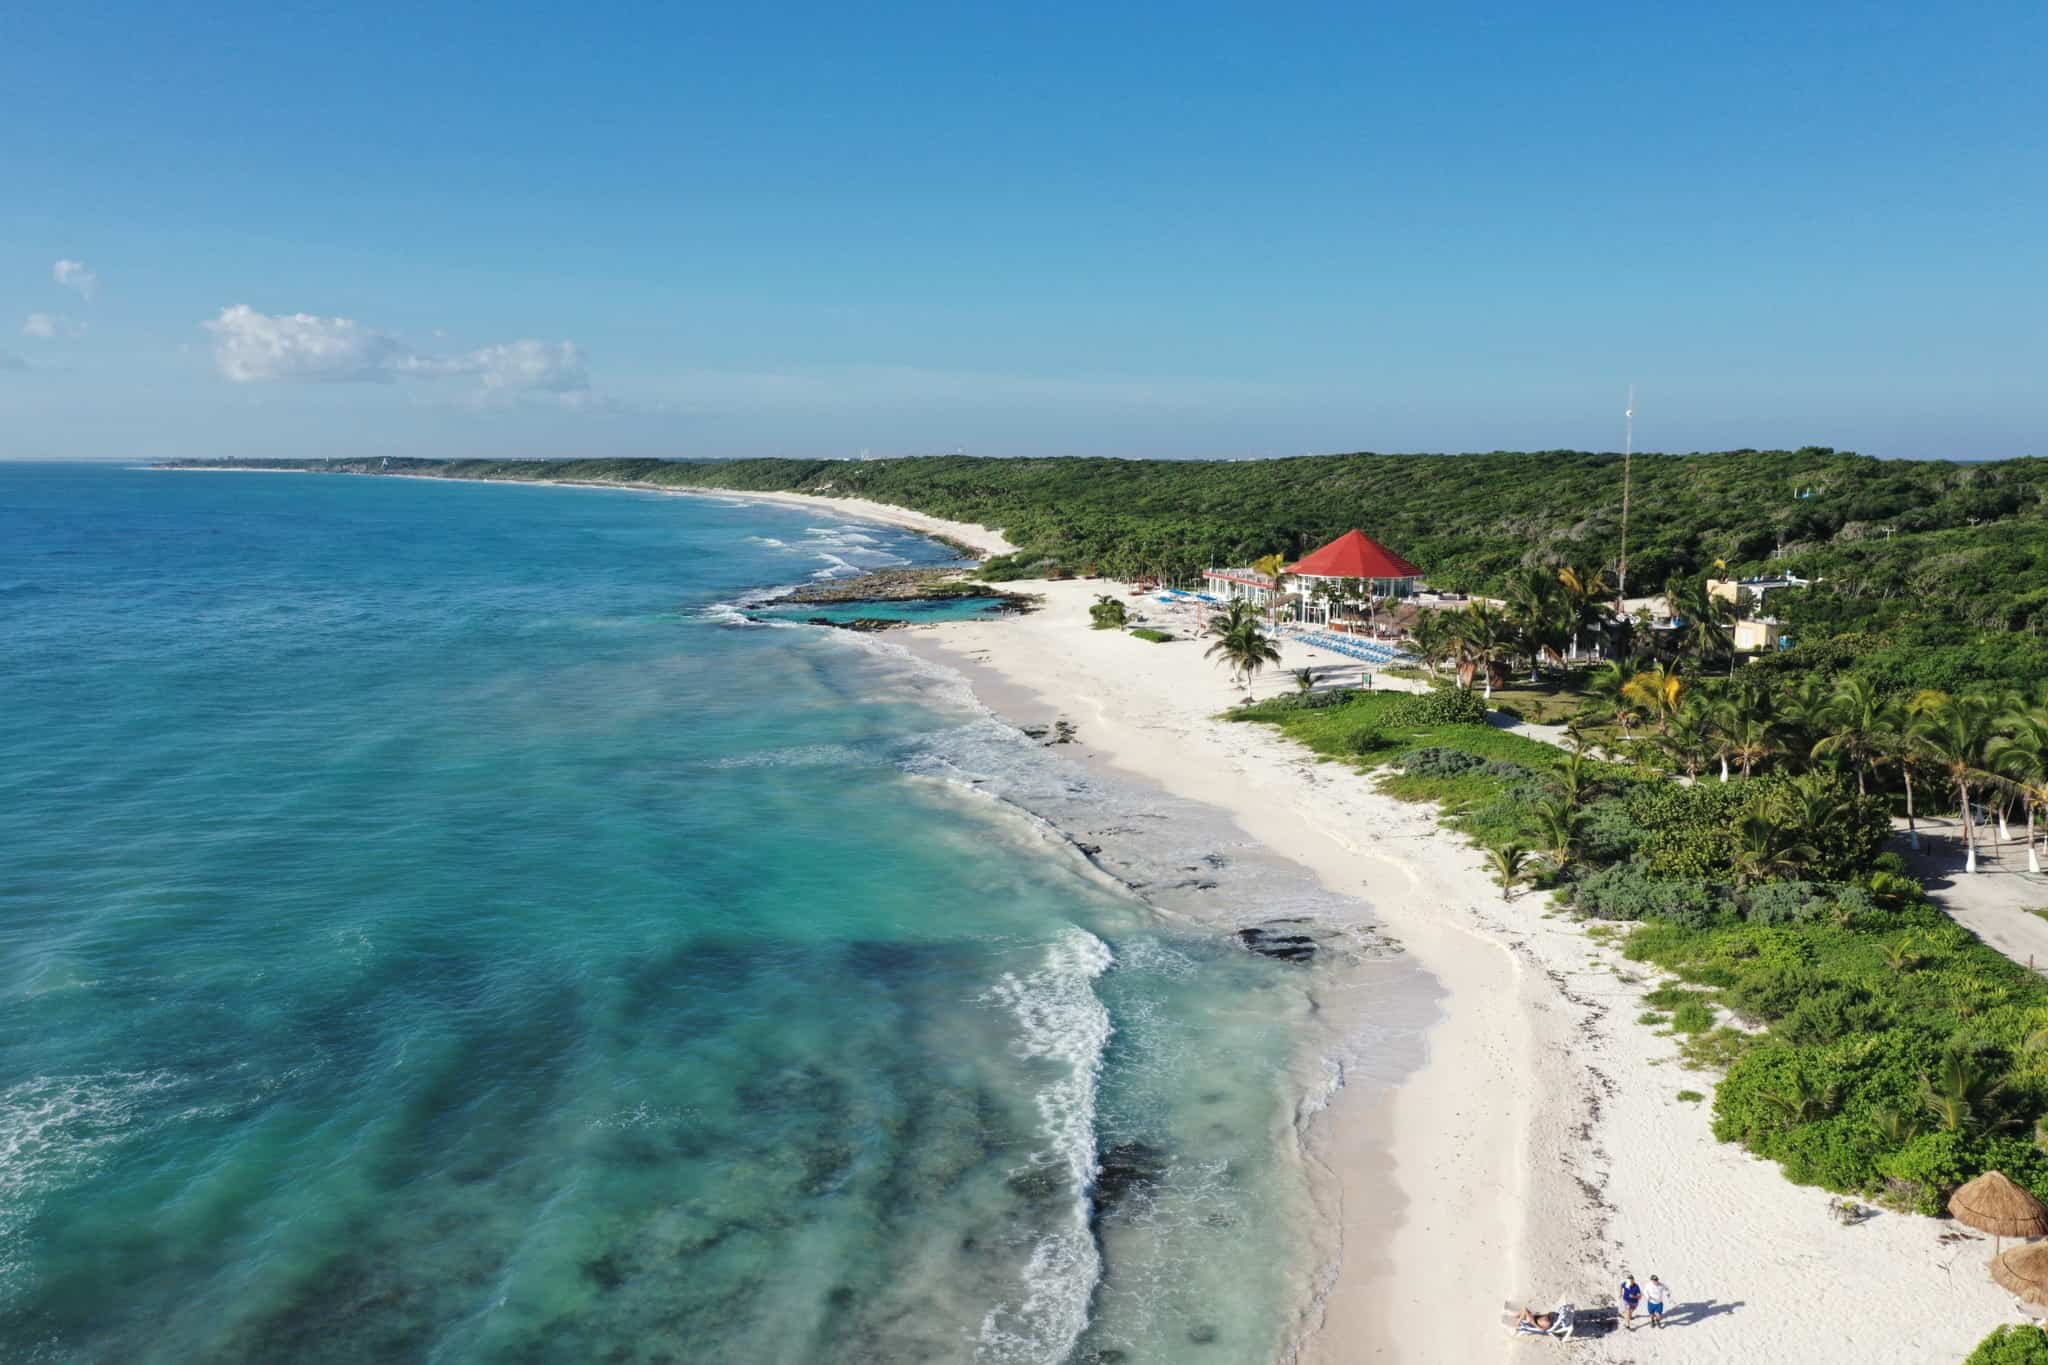 Cozumel vs Tulum - Which is the Better Trip?